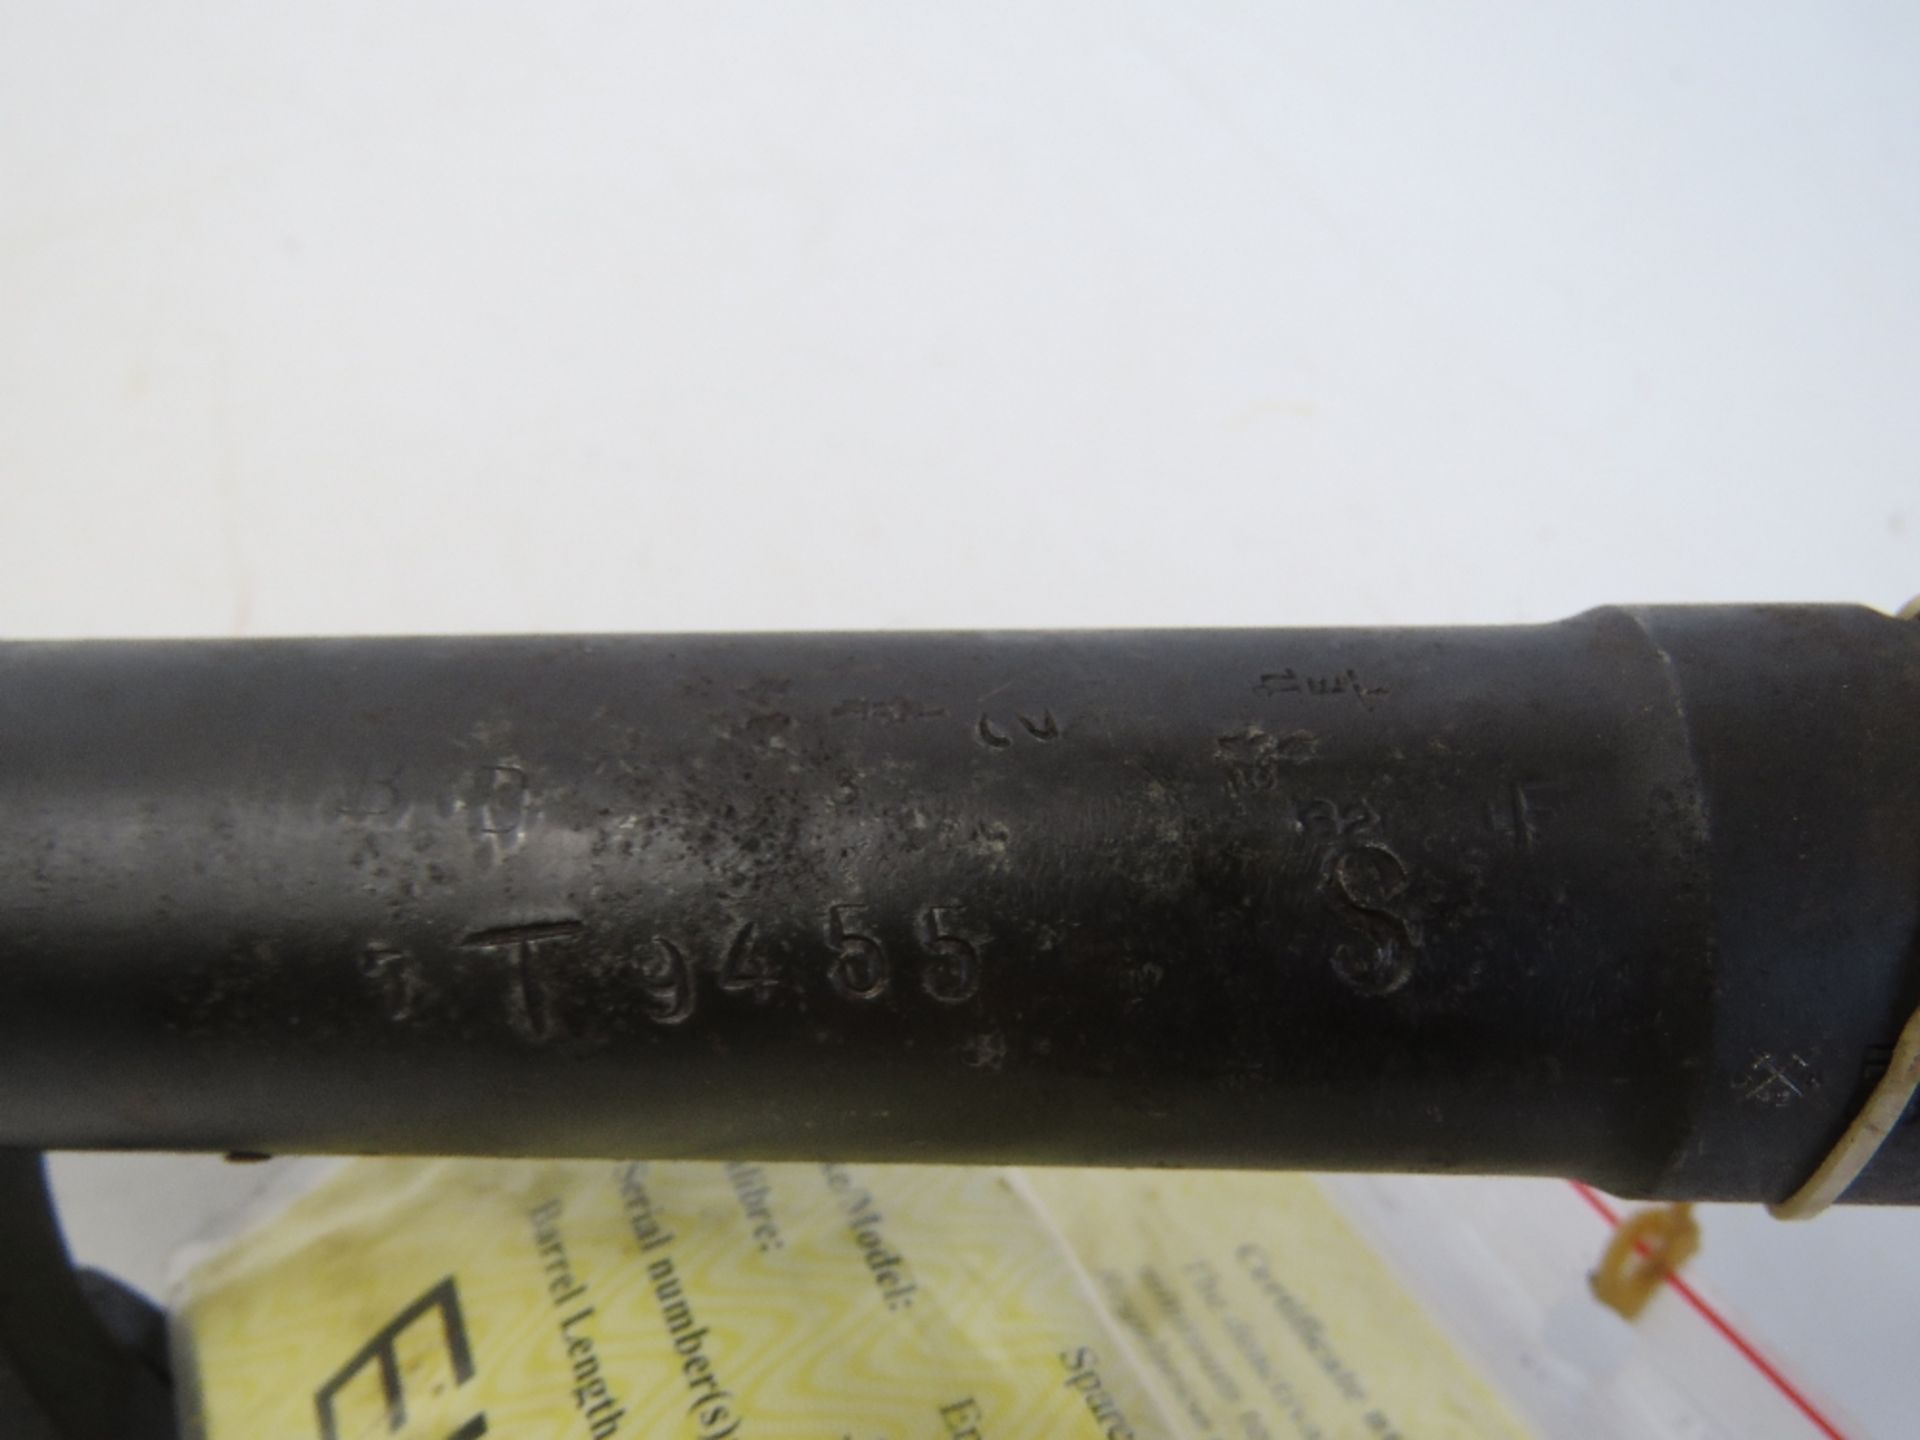 A deactivated Bren Mk11 barrel with carry handle. With certificate. - Image 3 of 3